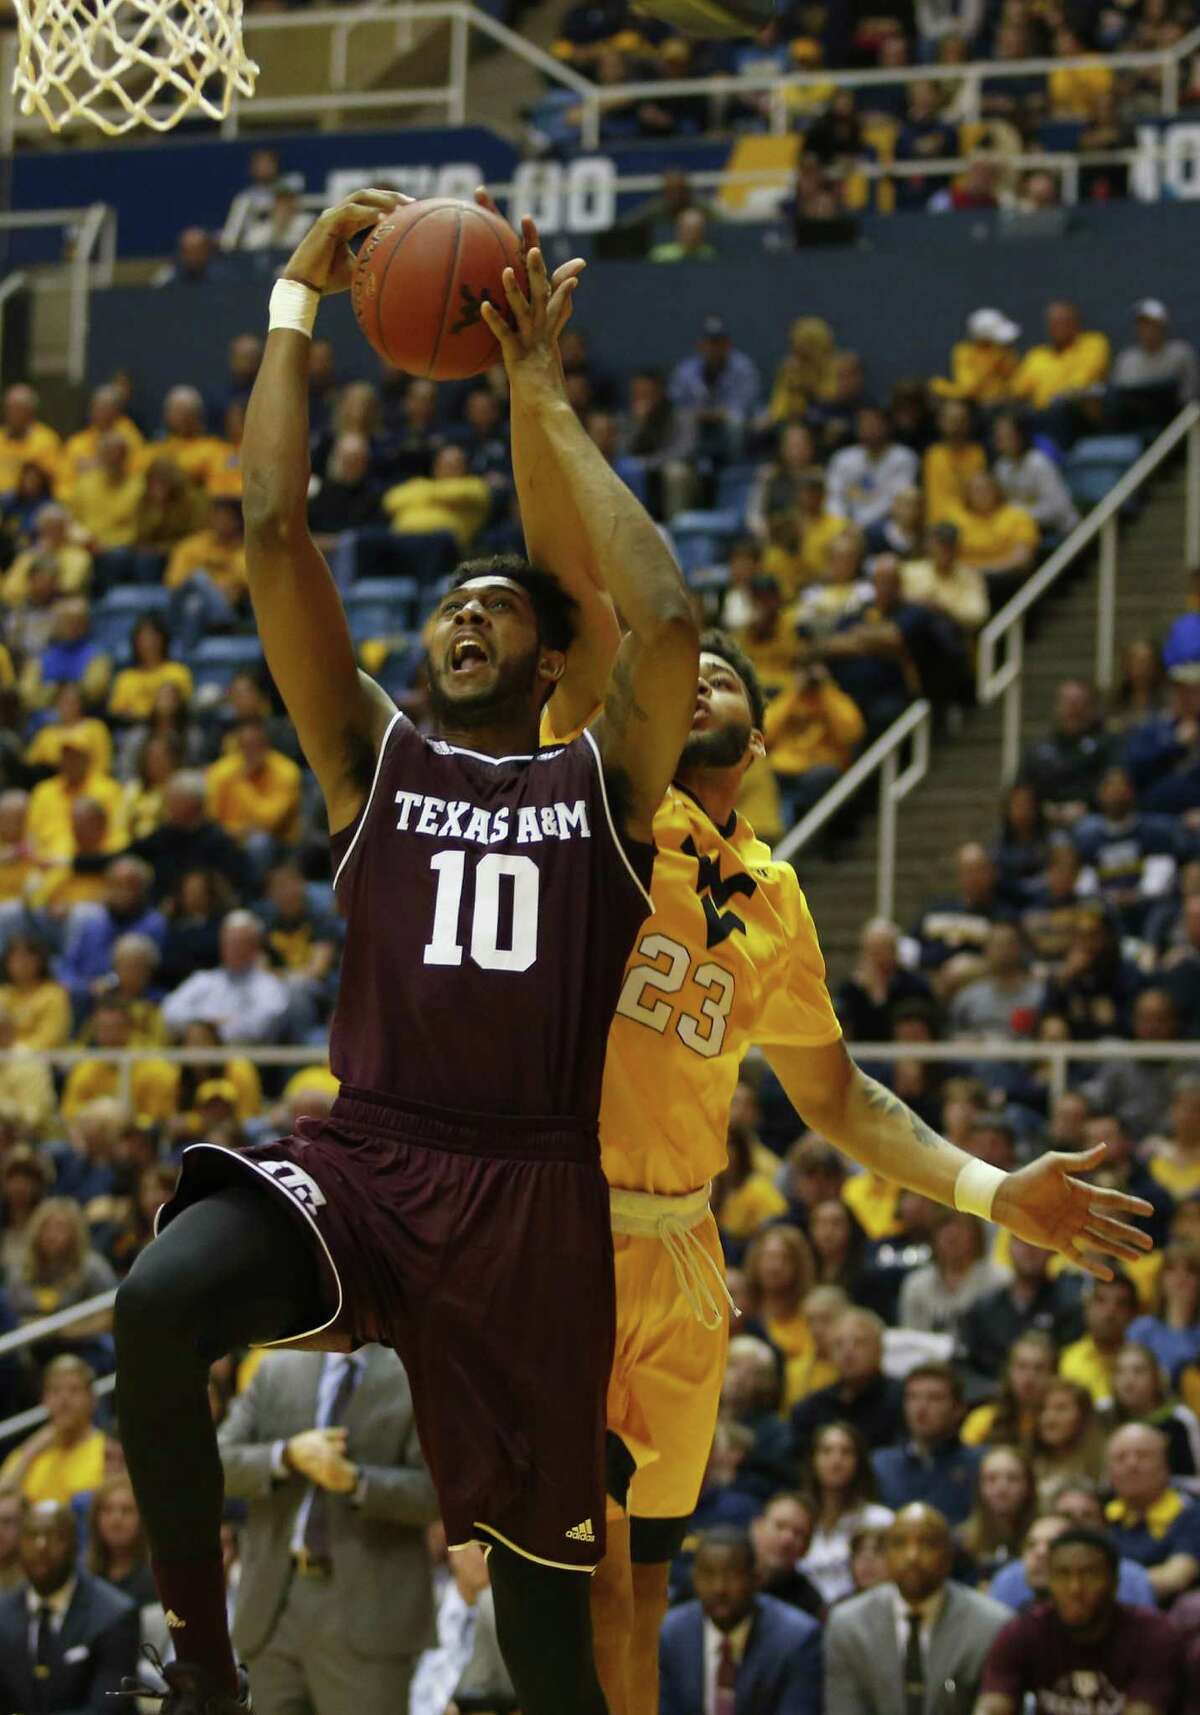 MORGANTOWN, WV - JANUARY 28: Tonny Trocha-Morelos #10 of the Texas A&M Aggies drives to the hoop against Esa Ahmad #23 of the West Virginia Mountaineers at the WVU Coliseum on January 28, 2017 in Morgantown, West Virginia. (Photo by Justin K. Aller/Getty Images)